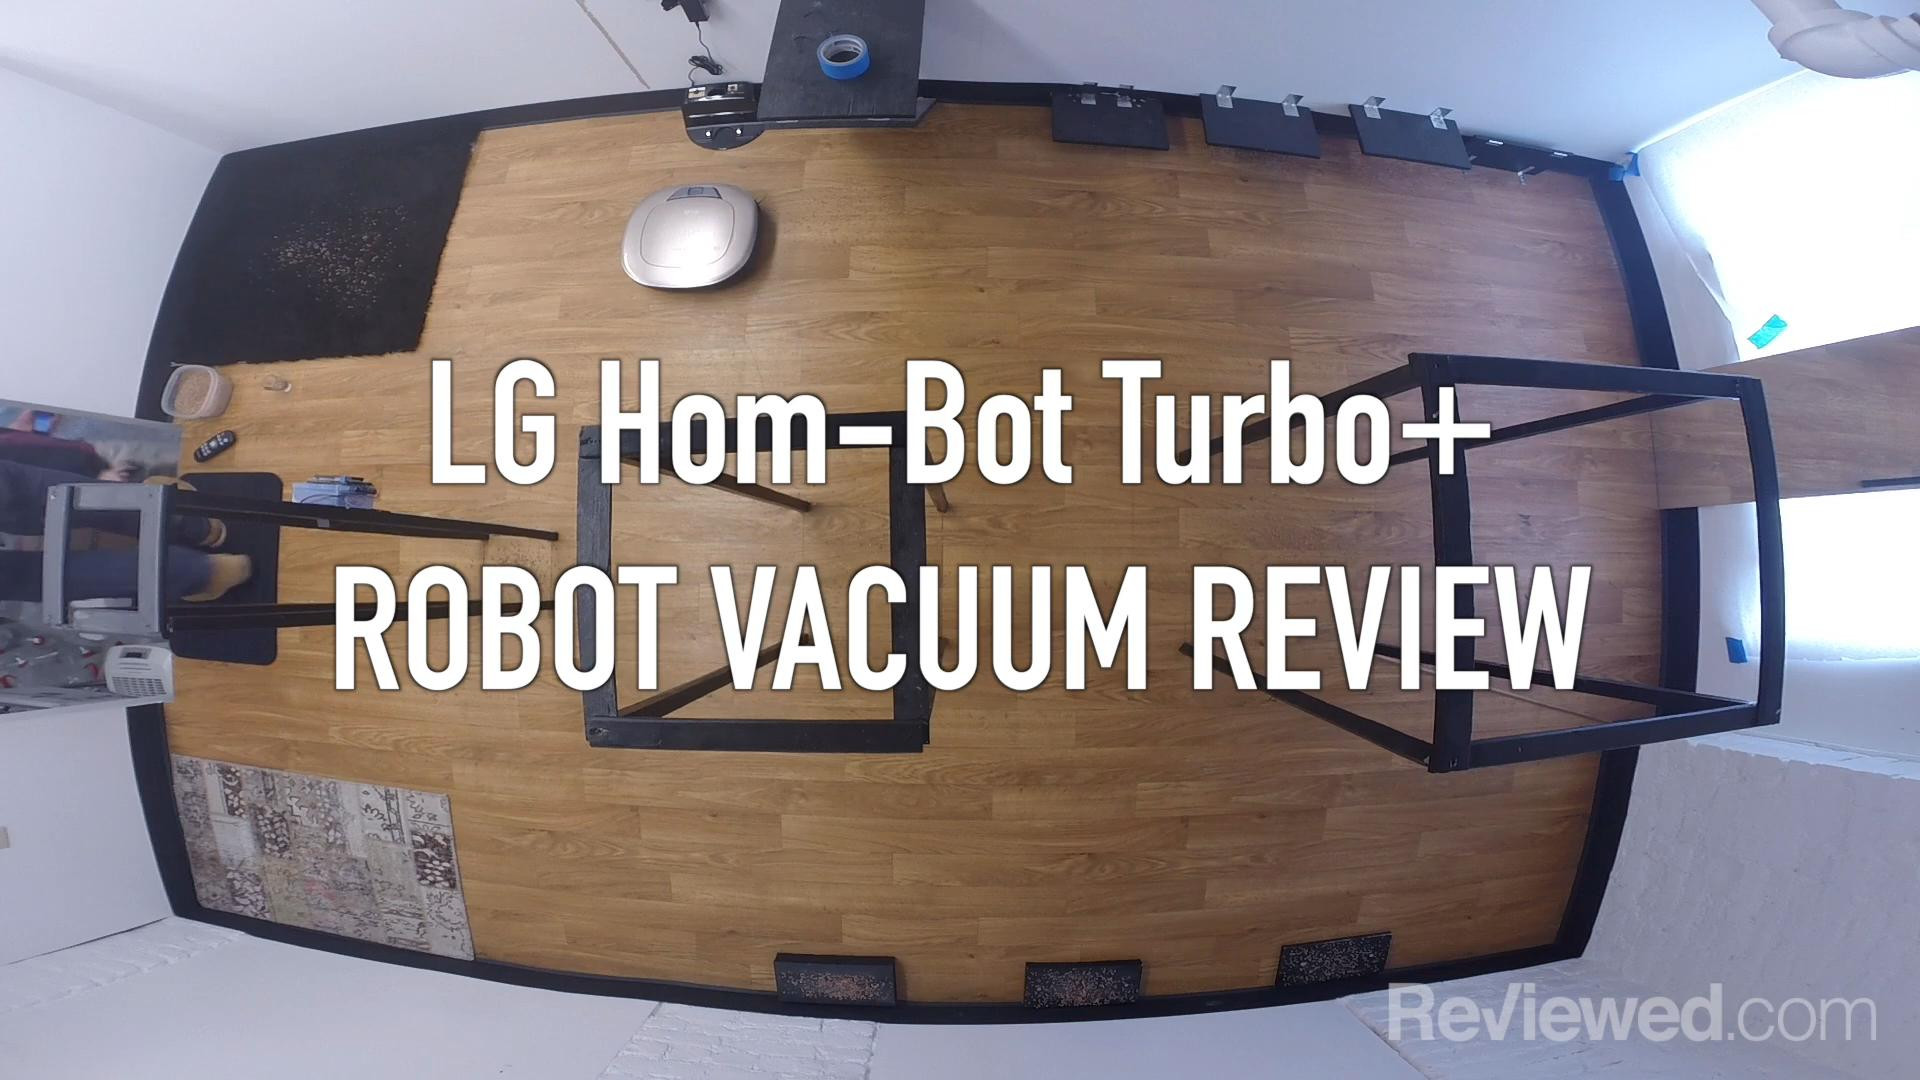 20 Ideal Hardwood Floor Cleaning Robot Reviews 2024 free download hardwood floor cleaning robot reviews of lg hom bot turbo cr5765gd robot vacuum review reviewed com robot with lg hom bot turbo cr5765gd robot vacuum review reviewed com robot vacuums